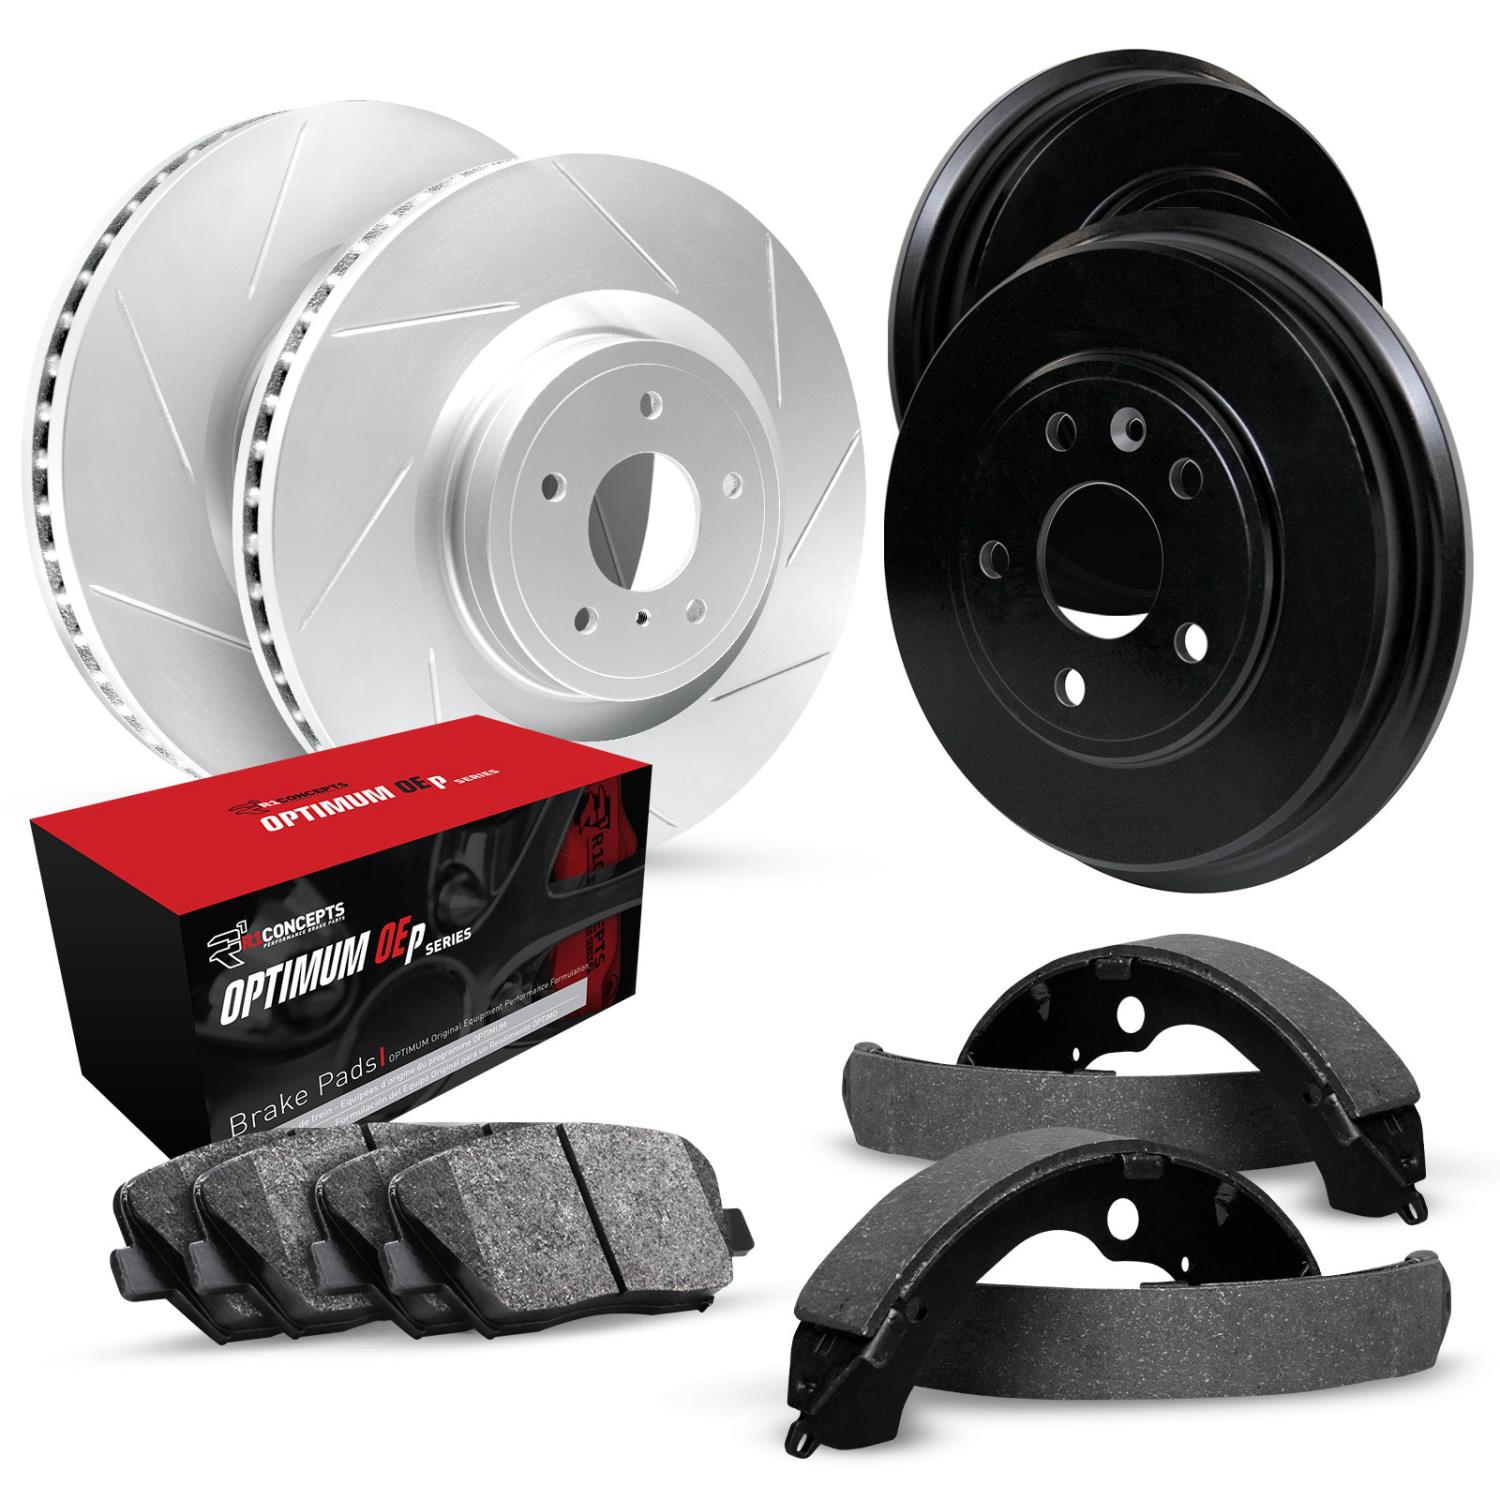 GEO-Carbon Slotted Brake Rotor & Drum Set w/Optimum OE Pads & Shoes, 1981-1984 GM, Position: Front & Rear